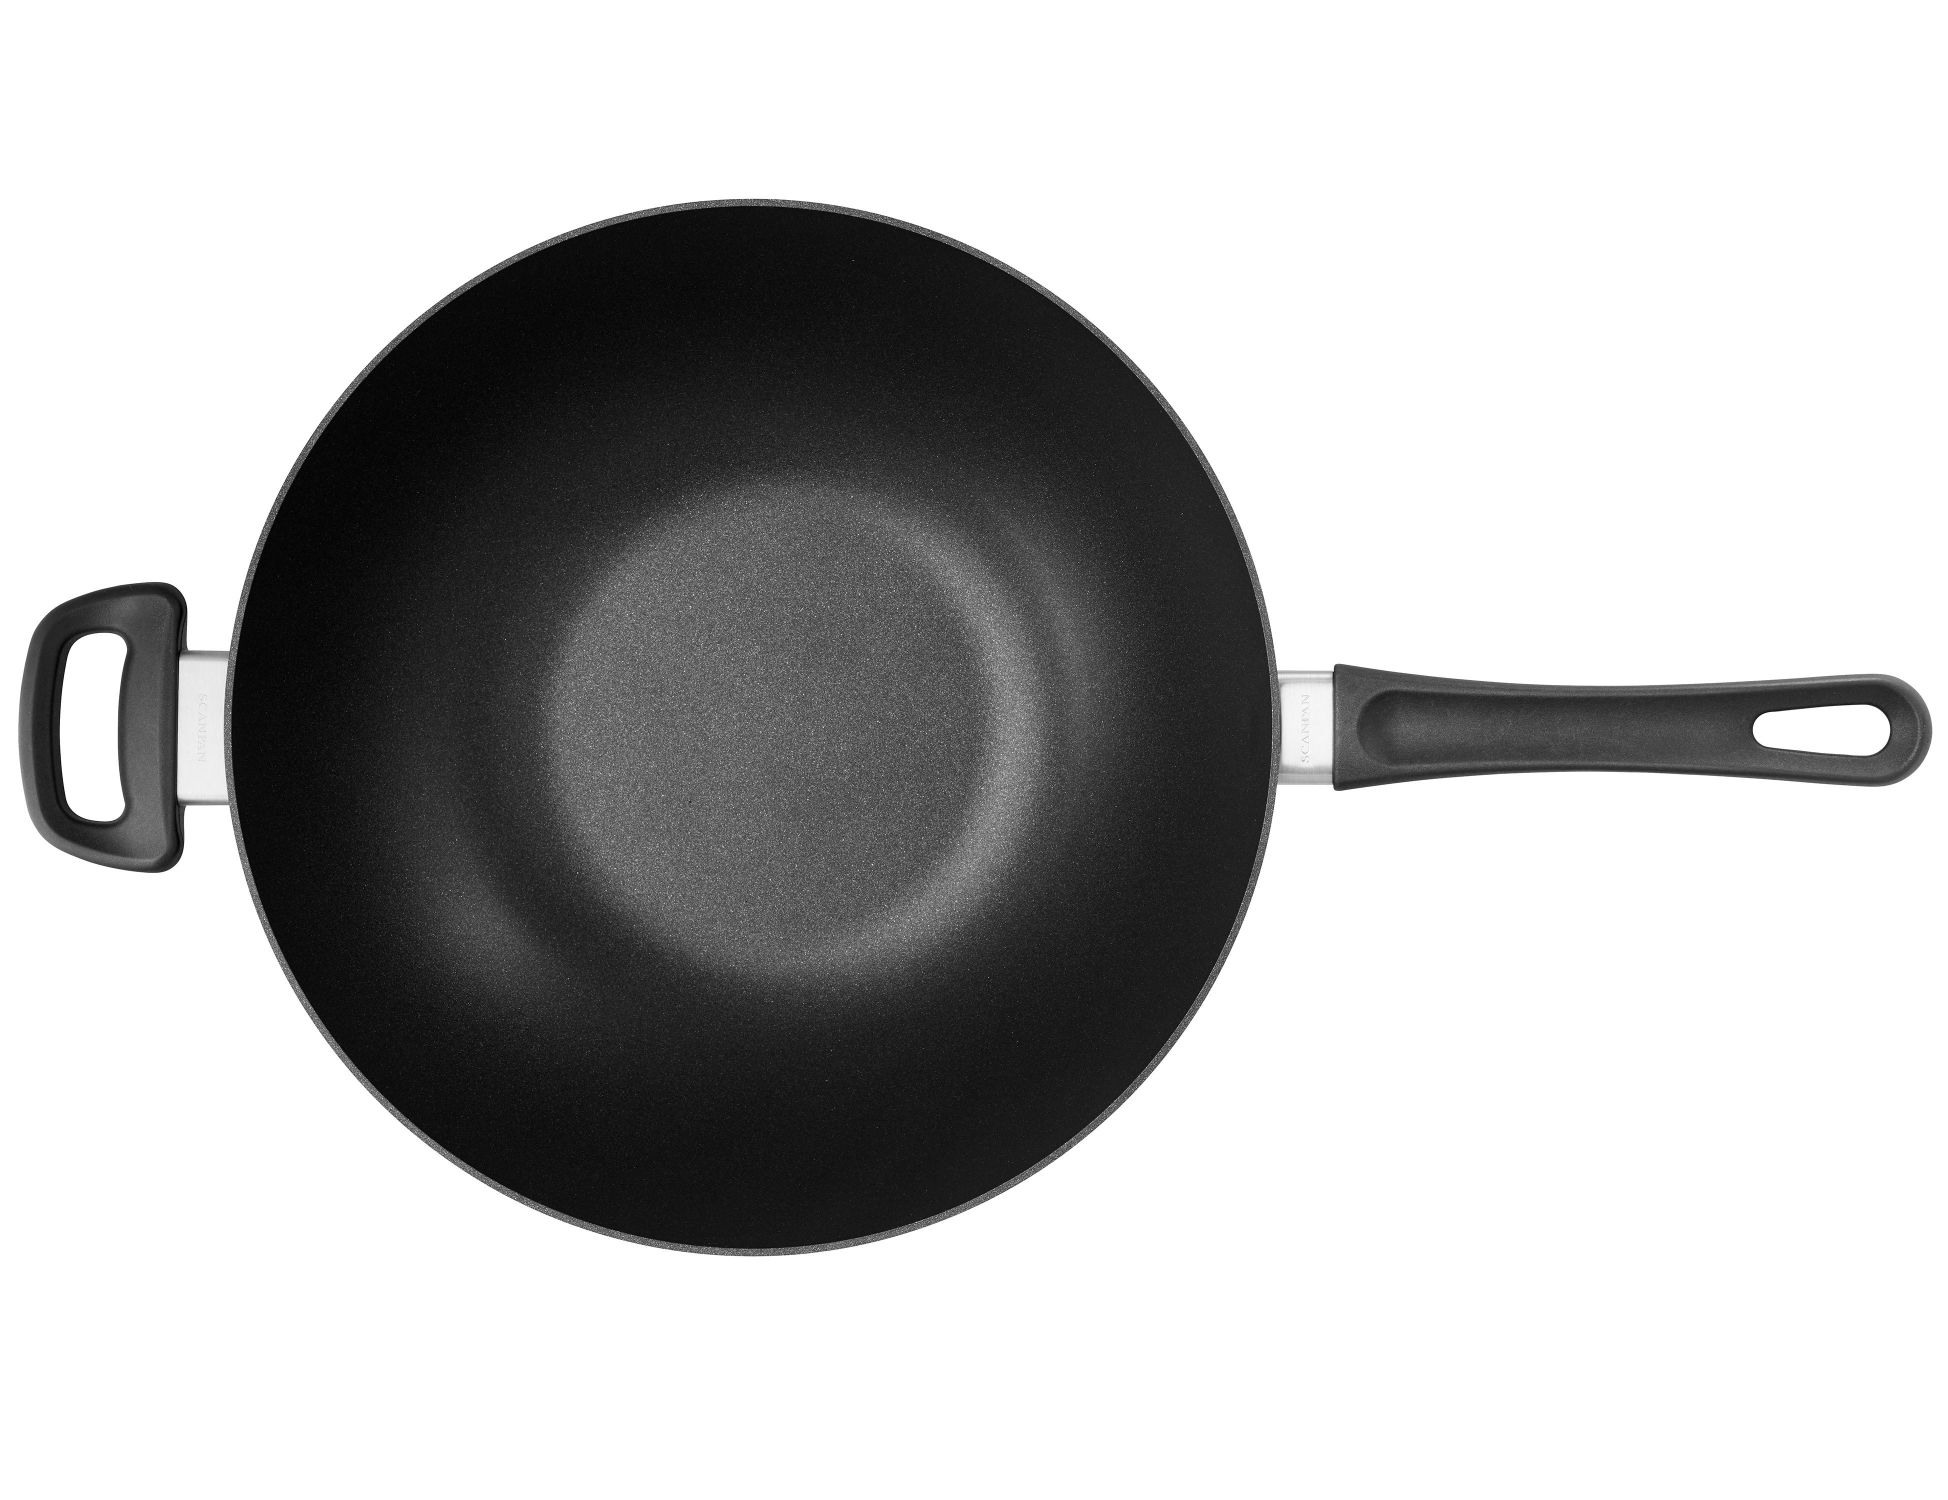  Classic Induction Wok